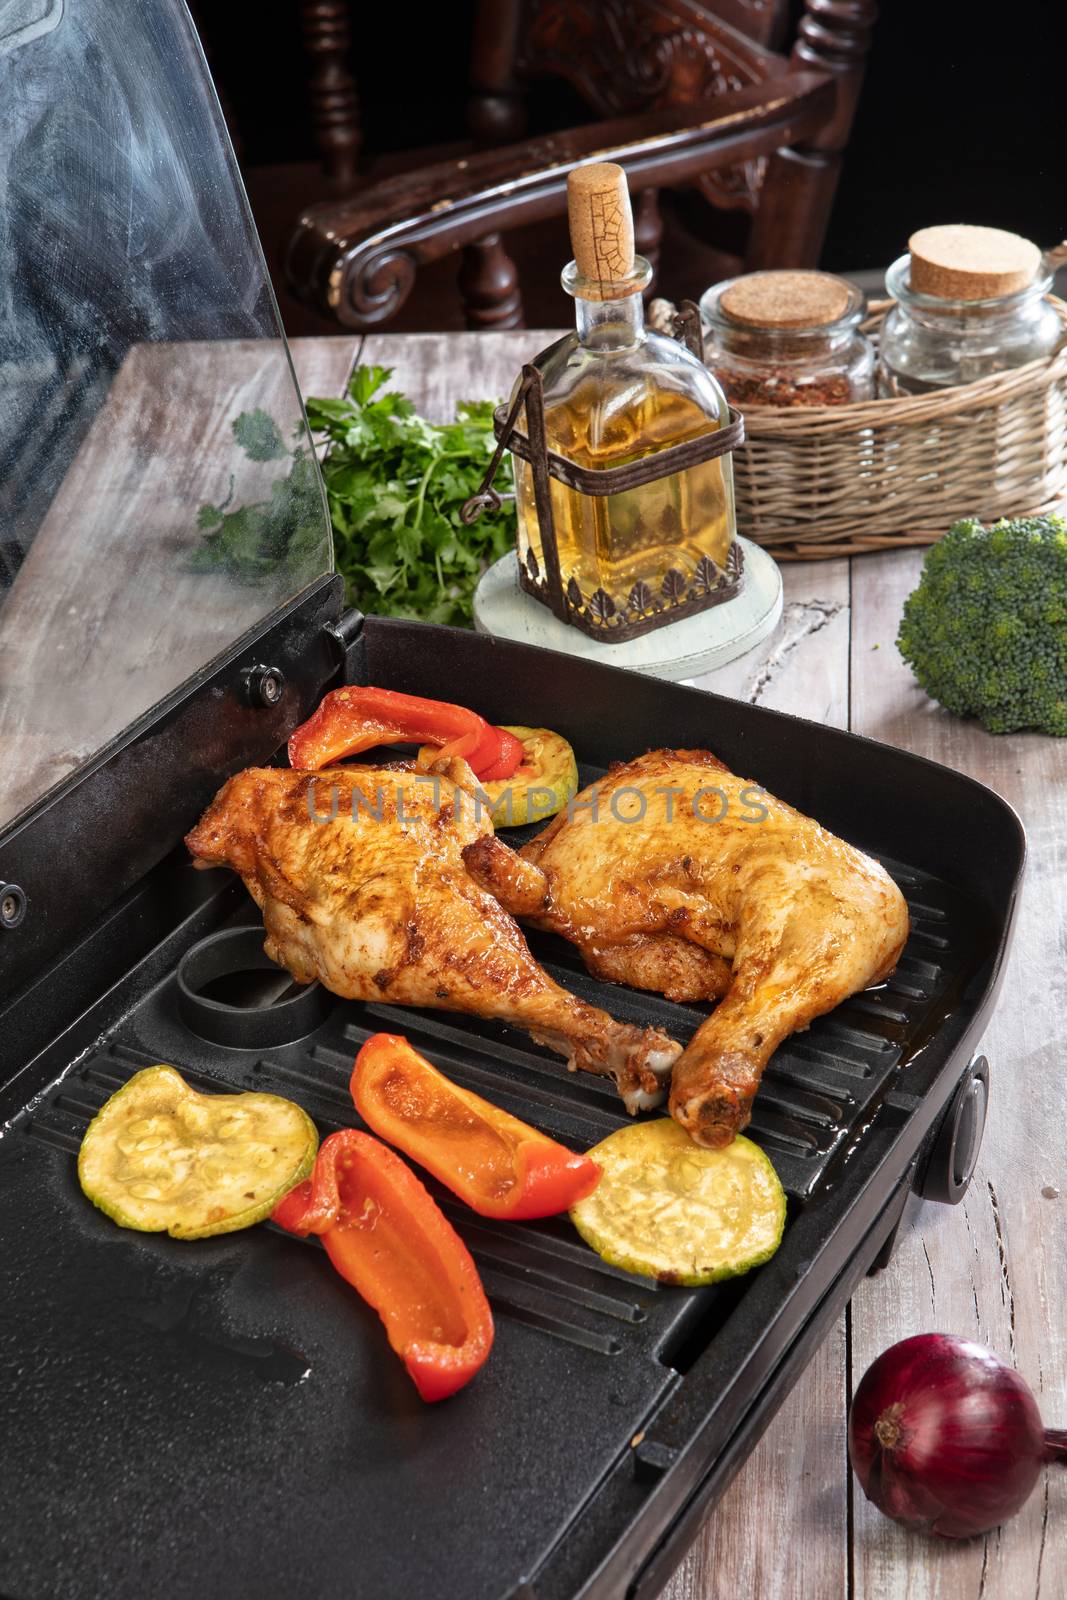 Roasted chicken and vegetables on a wooden table